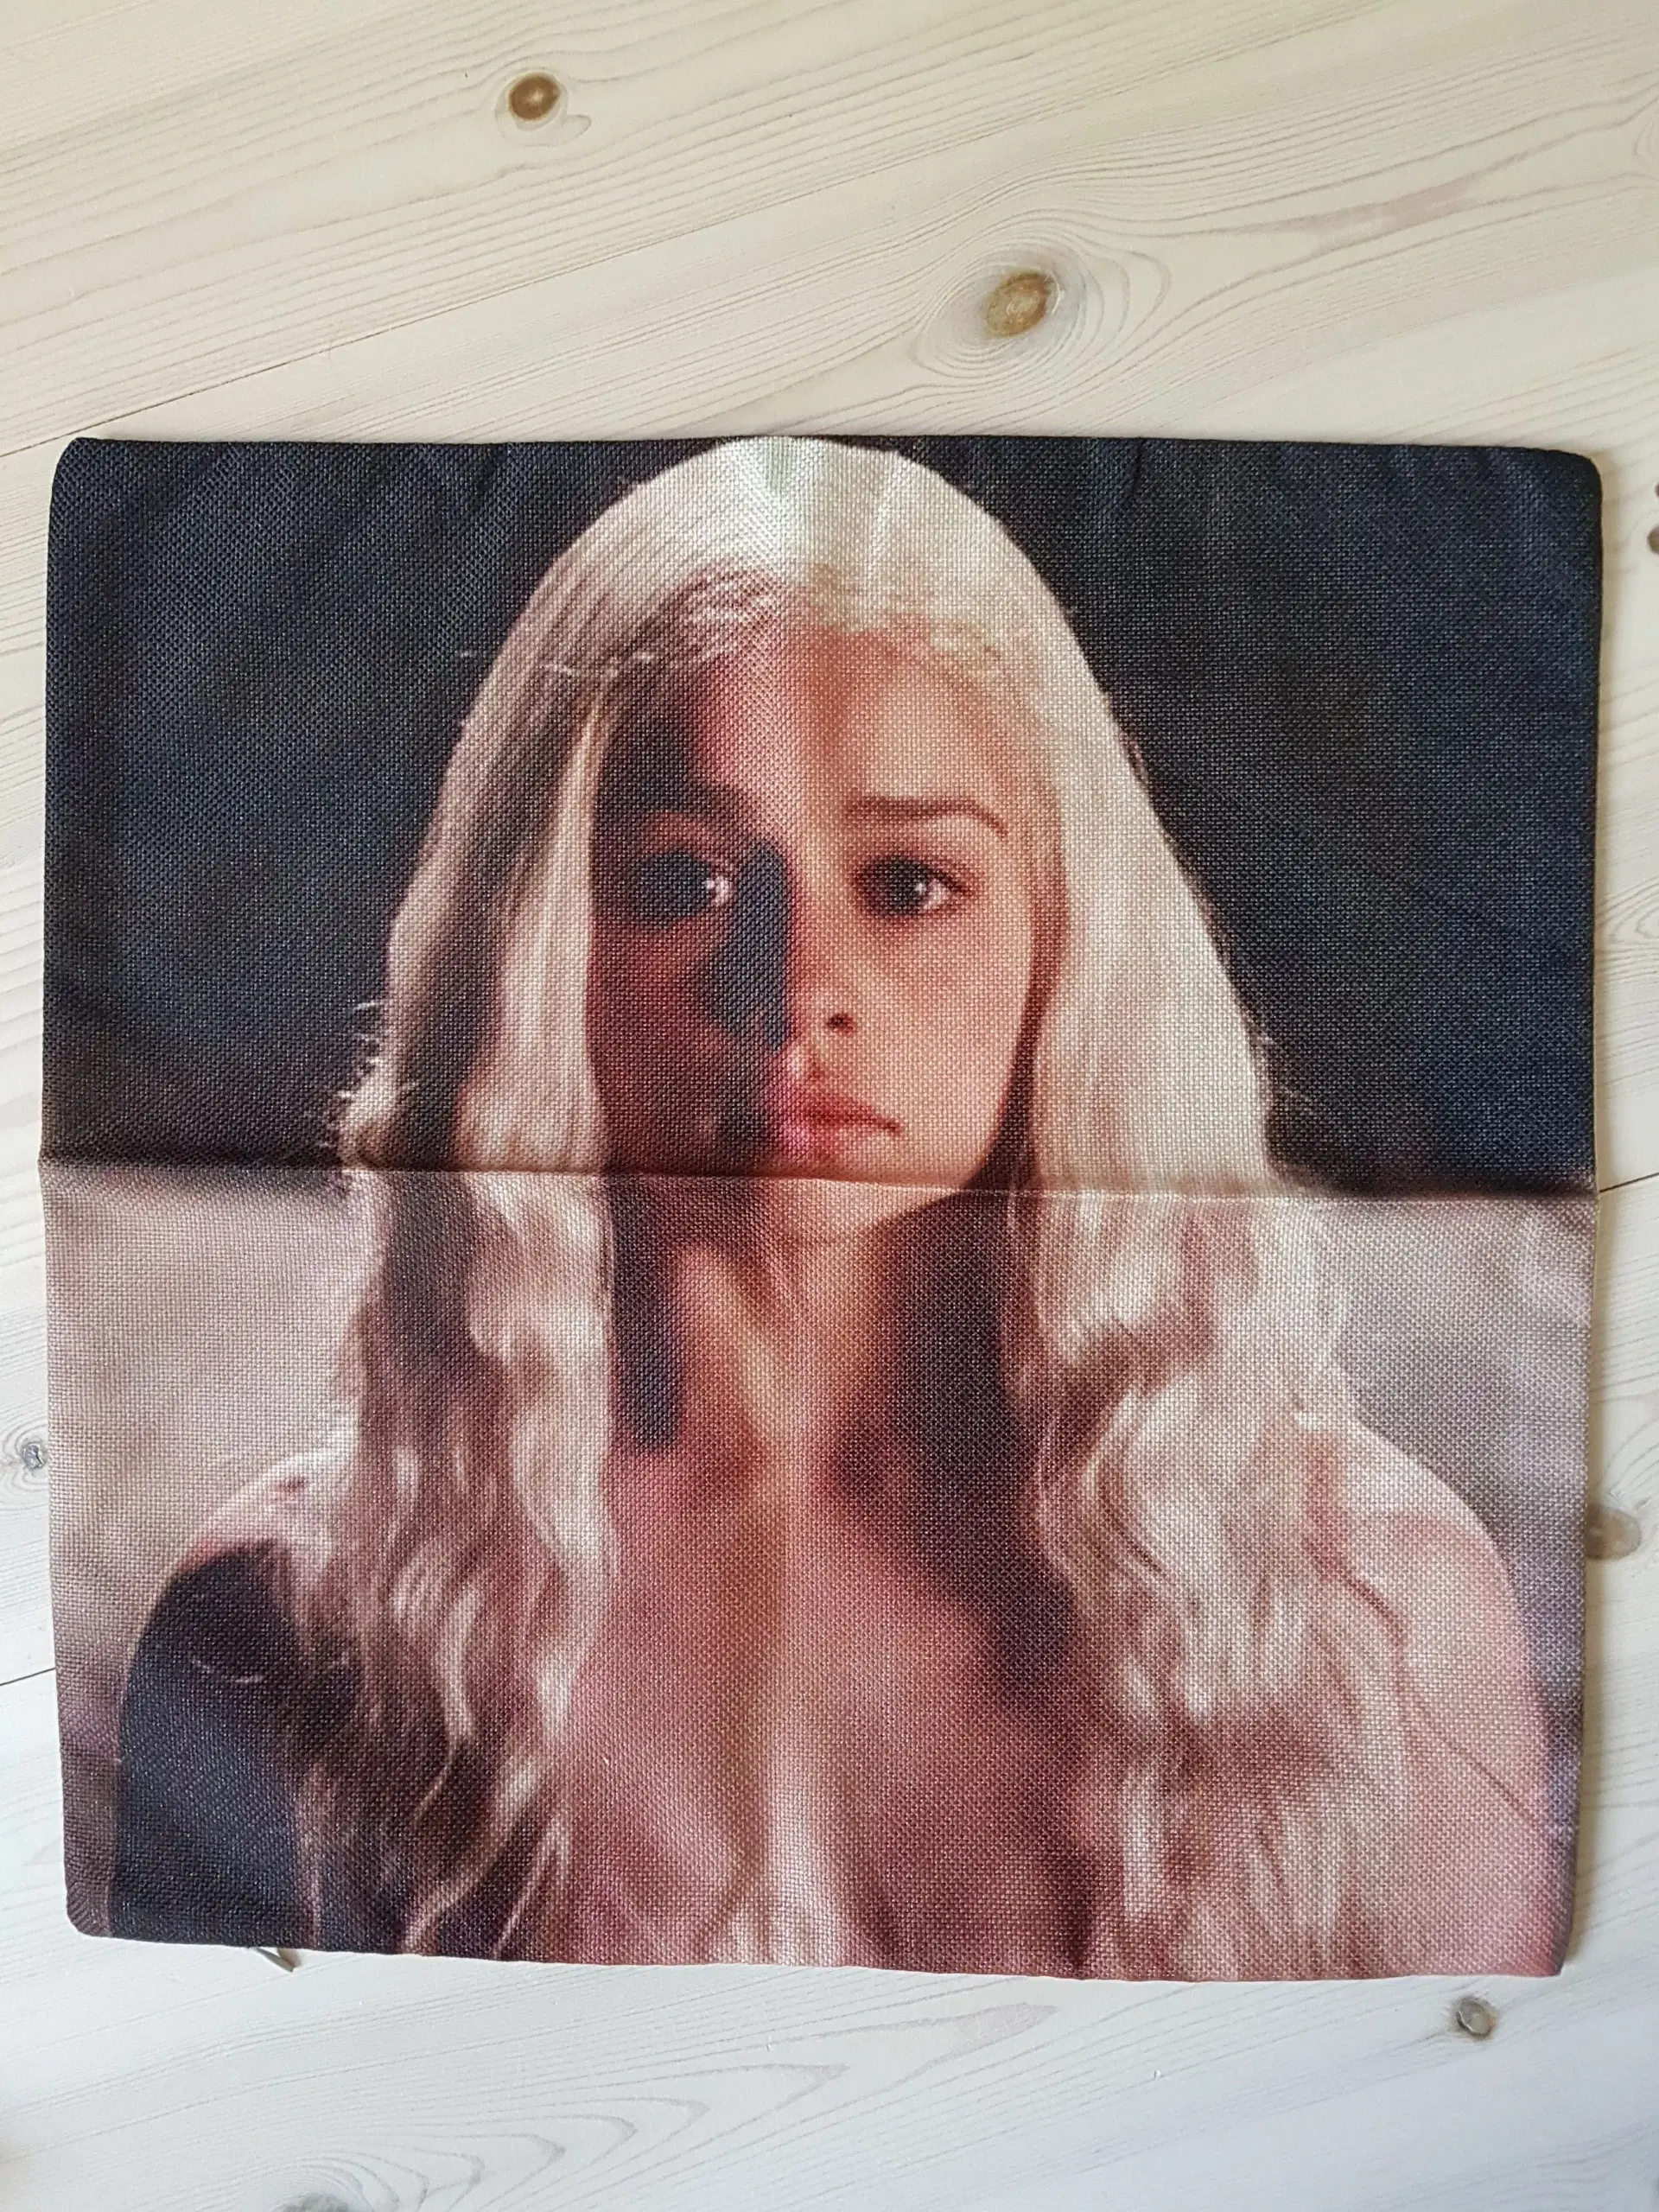 Game of thrones - NYT